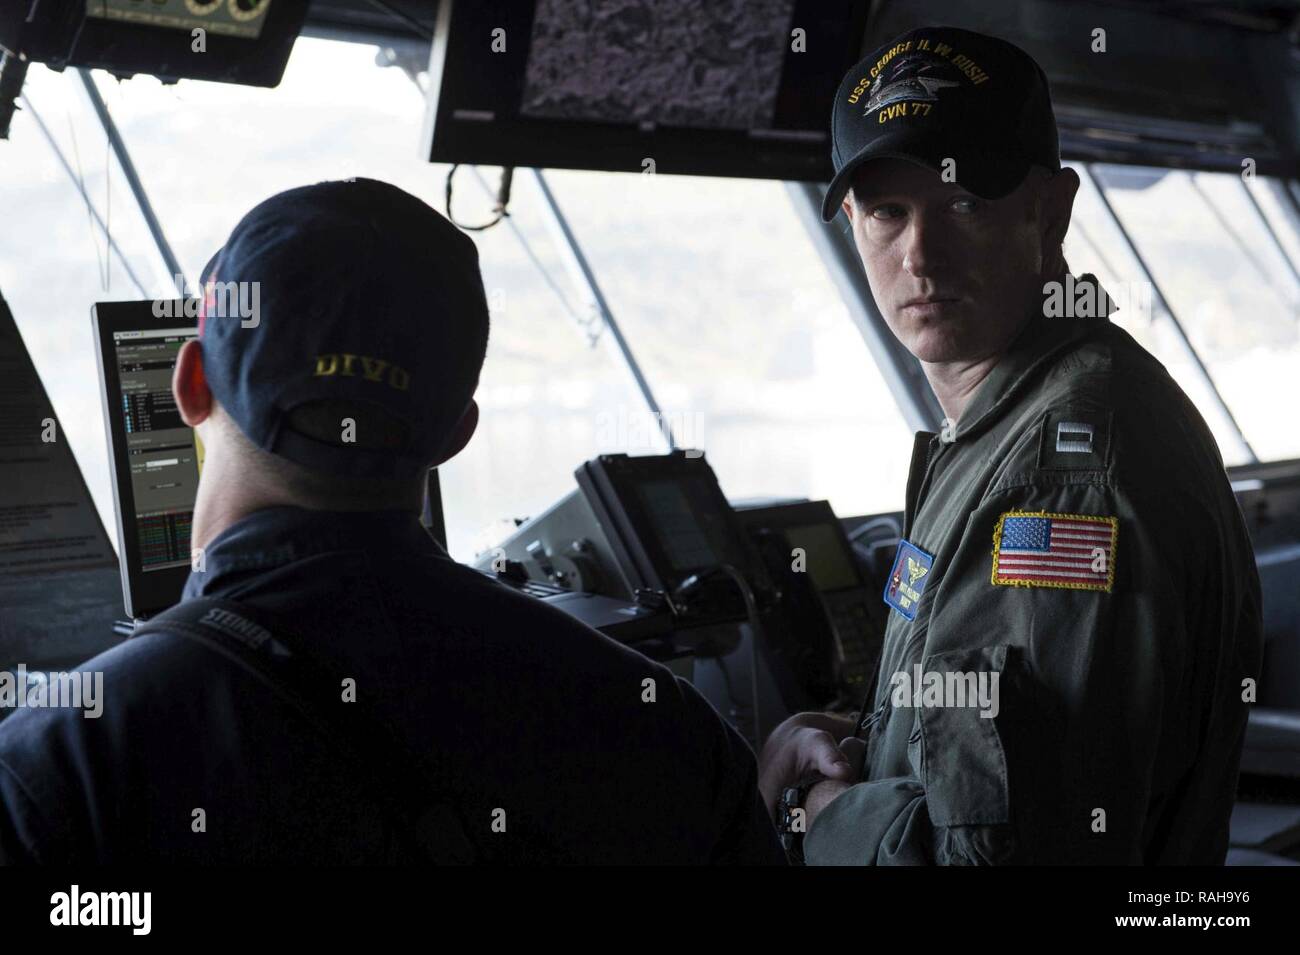 SOUDA BAY, Greece (Feb. 6, 2017) Ens. Tommy Madera, left, and Lt. Matt Pelonzi stands watch on the bridge aboard the aircraft carrier USS George H.W. Bush (CVN 77) as the ship arrives in Souda Bay, Greece. The ship's carrier strike group is conducting naval operations in the U.S. 6th Fleet area of operations in support of U.S. national security interests. Stock Photo